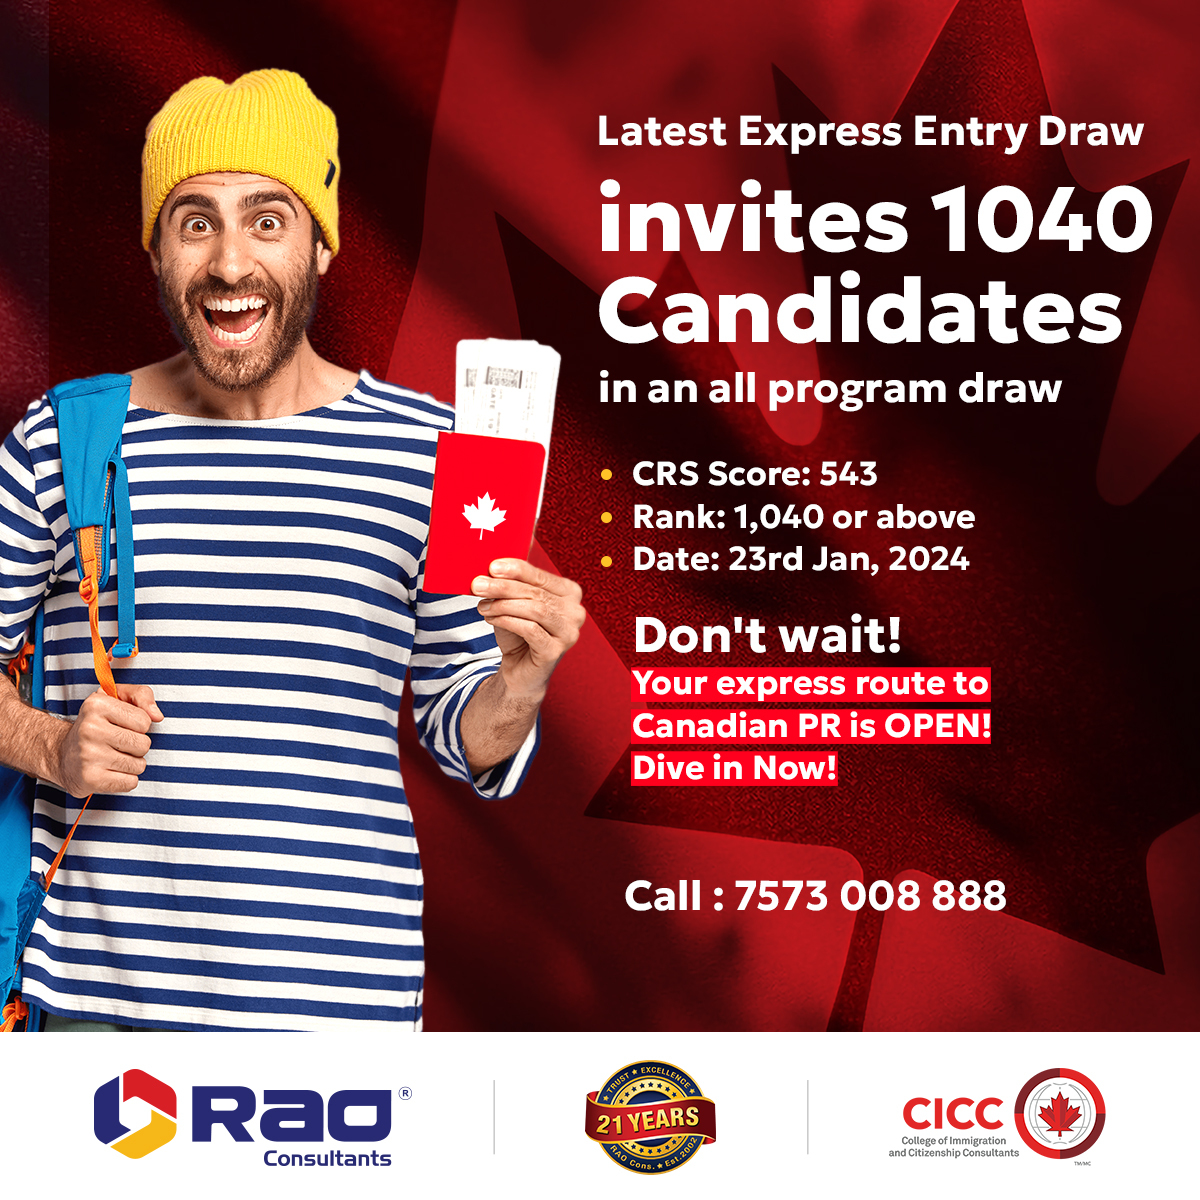 Rao Consultants shares the scoop: The latest Express Entry Draw invites candidates for Canada PR!
Invitations: 1,040
Minimum CRS Score: 543
#CanadaPR #ExpressEntry #RaoConsultants #SettleAbroad #NewBeginnings #GlobalCitizen #LivingAbroad #InternationalLiving  #GlobalExperience